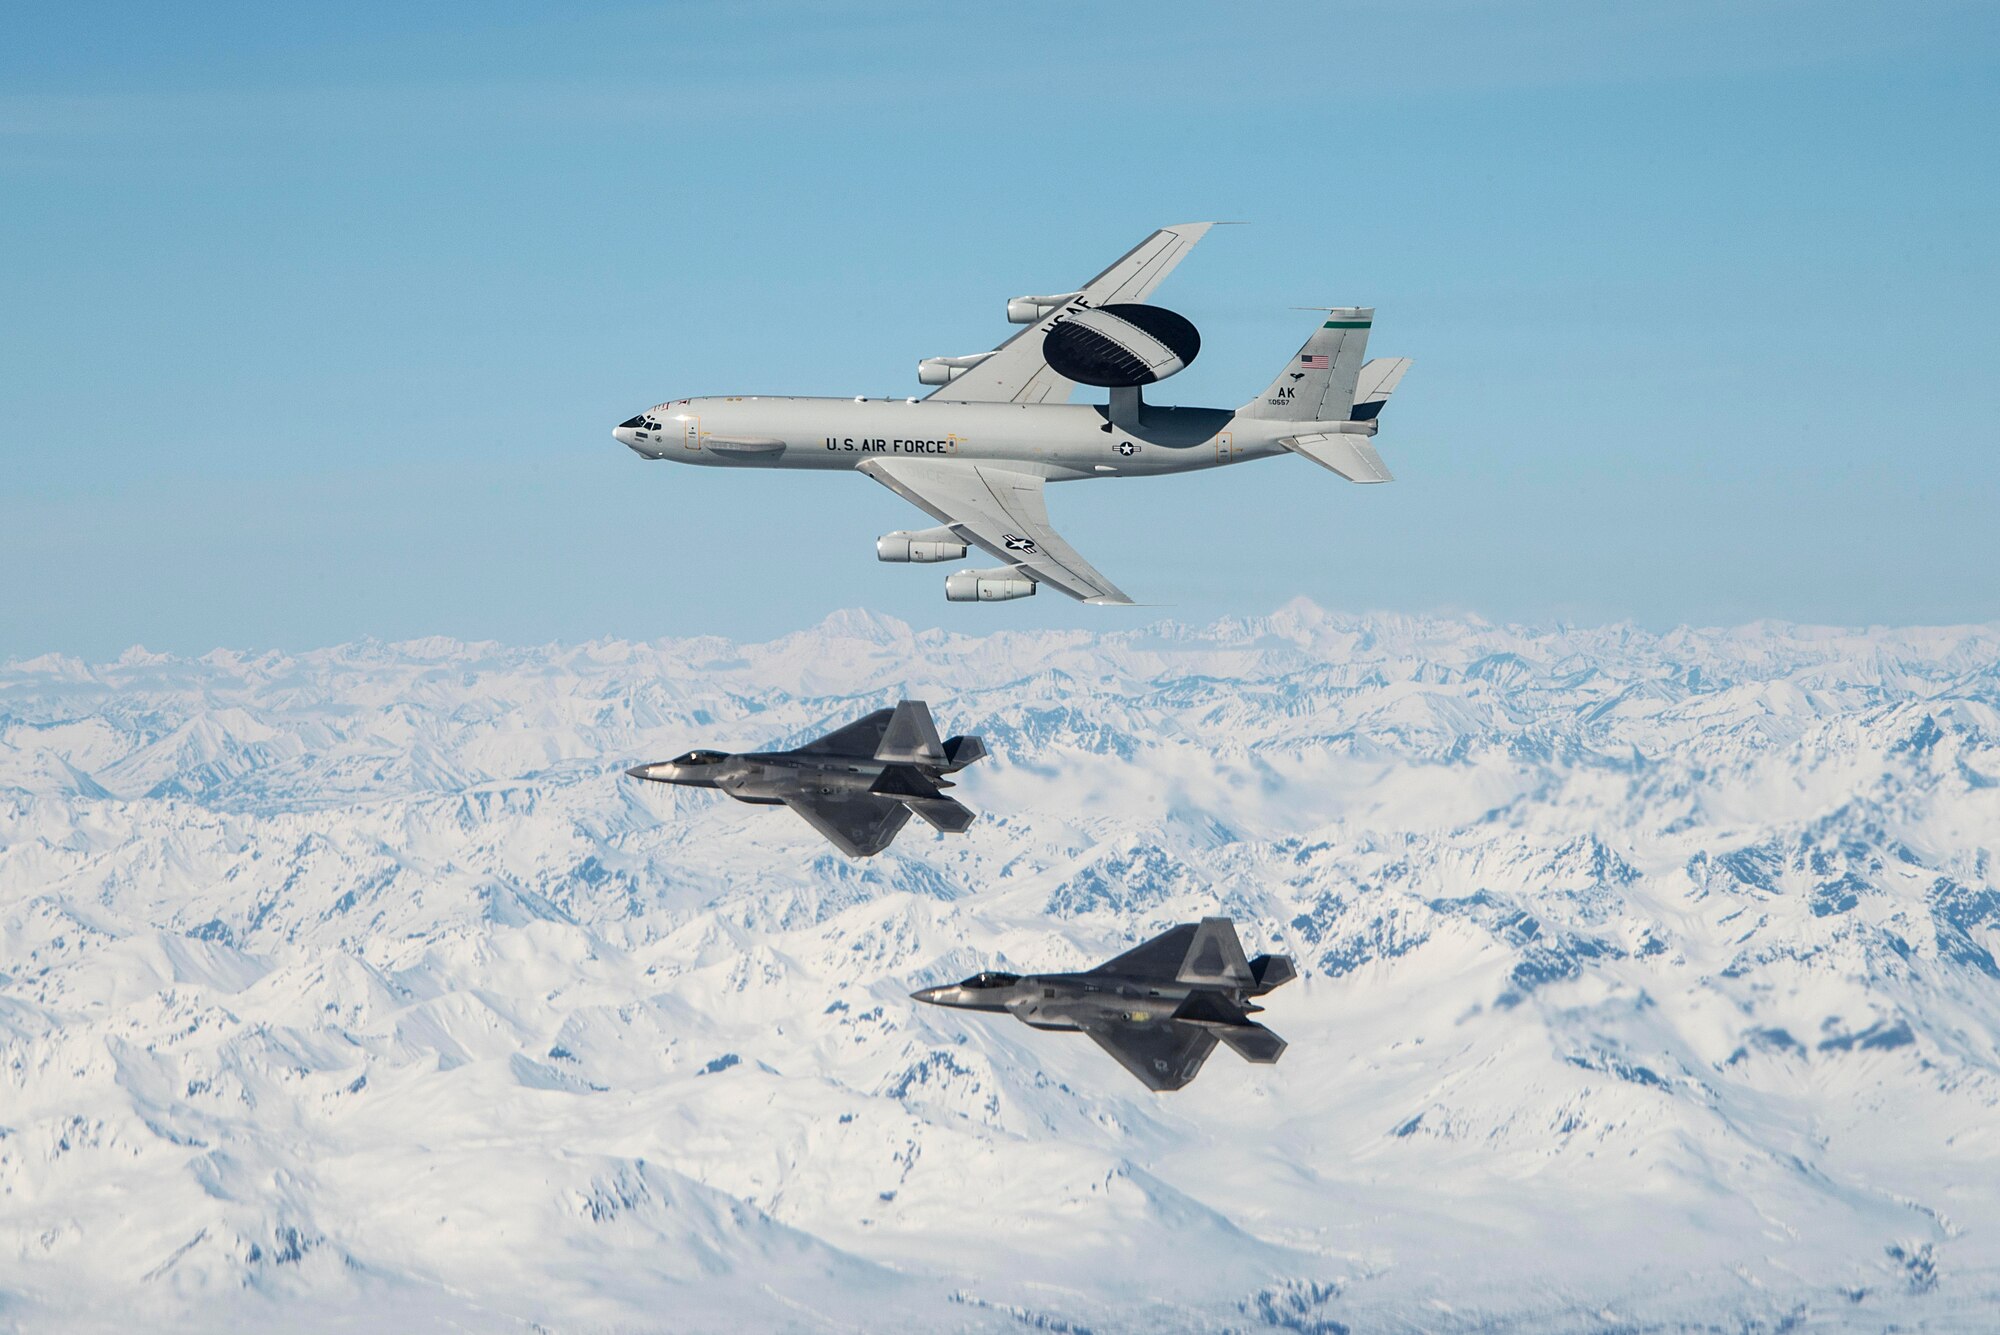 An E-3 Sentry and two F-22 Raptors assigned to Joint Base Elmendorf-Richardson (JBER) in Anchorage, Alaska fly over mountains in Alaska May 5, 2020.